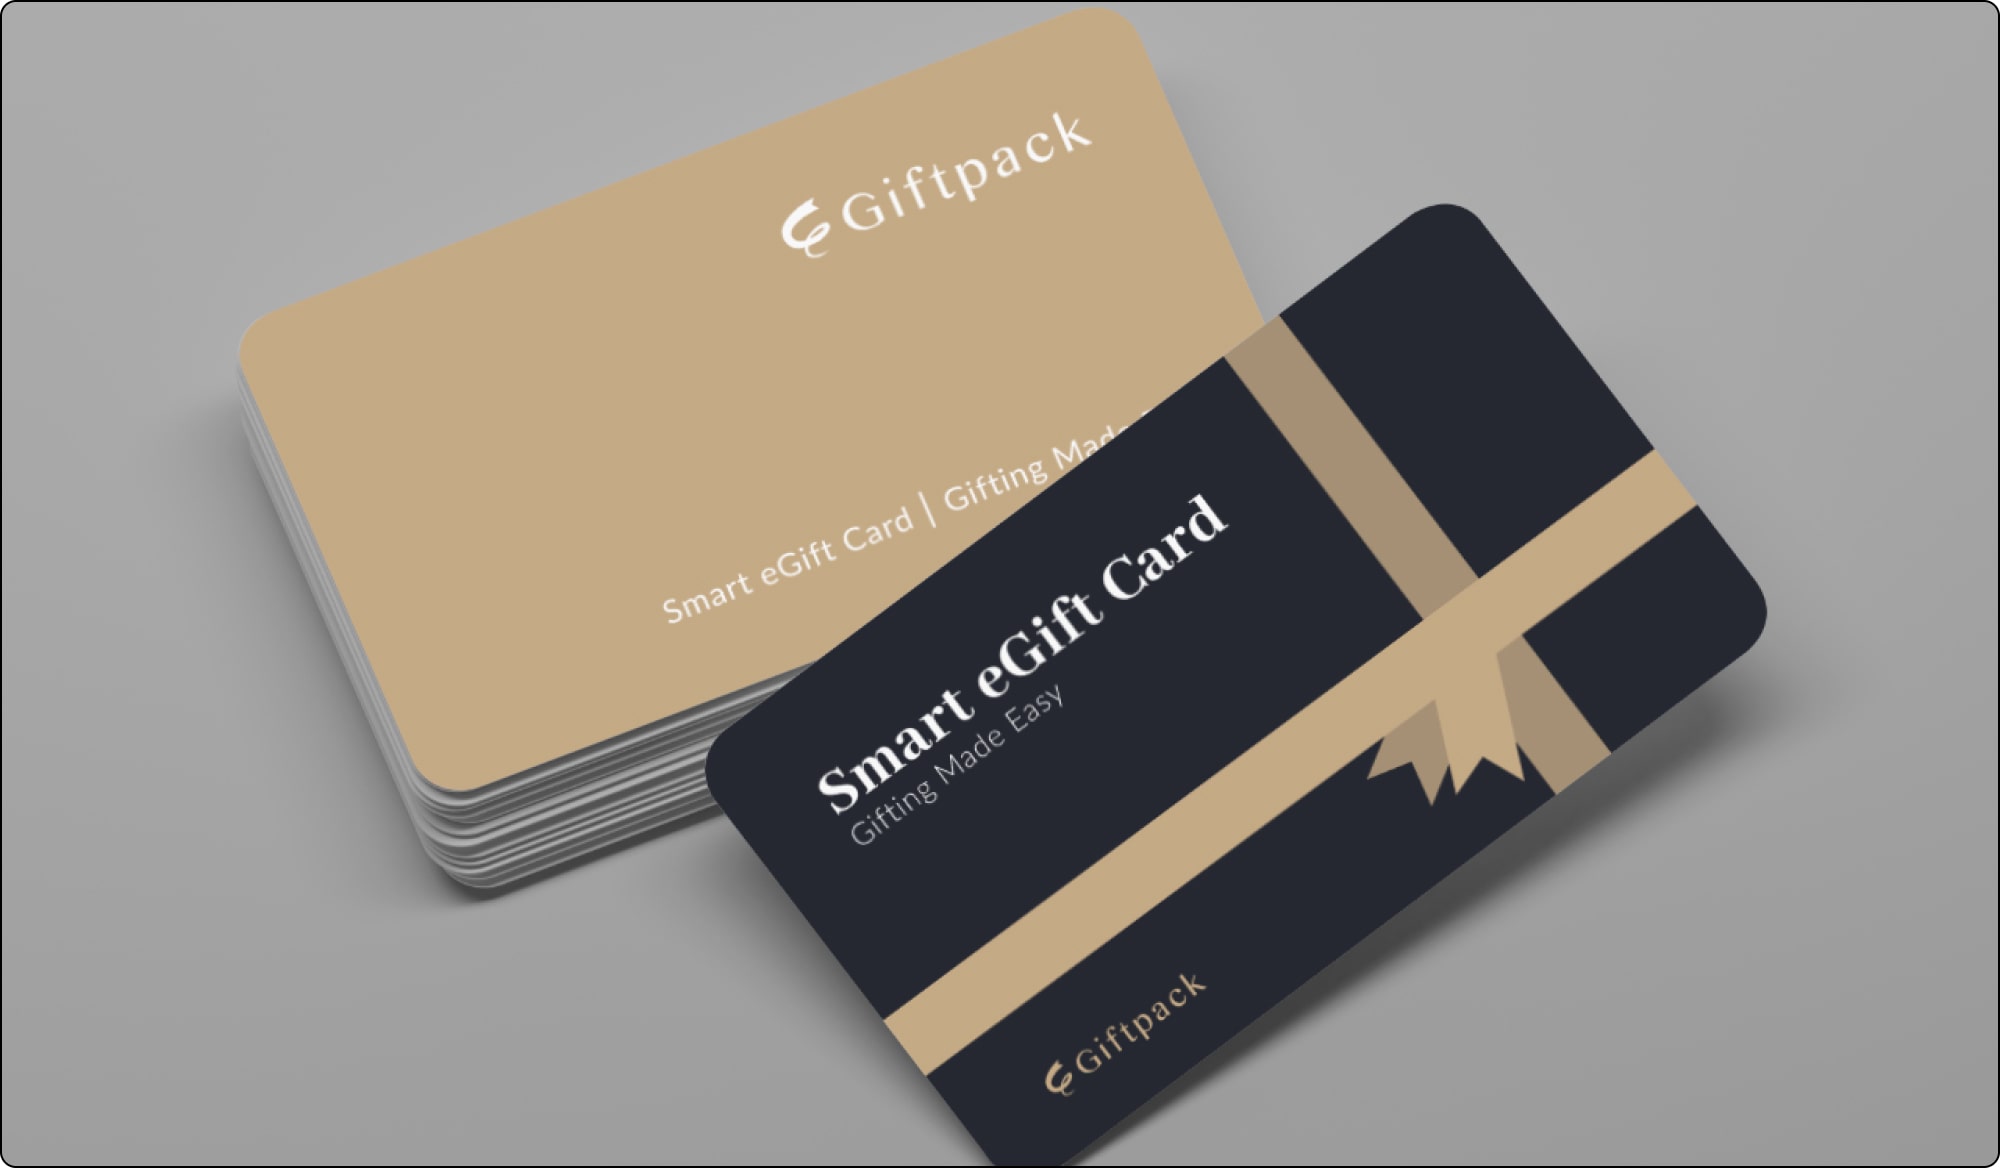 giftpack smart egift card for 350 brands for coworker appreciation gifts